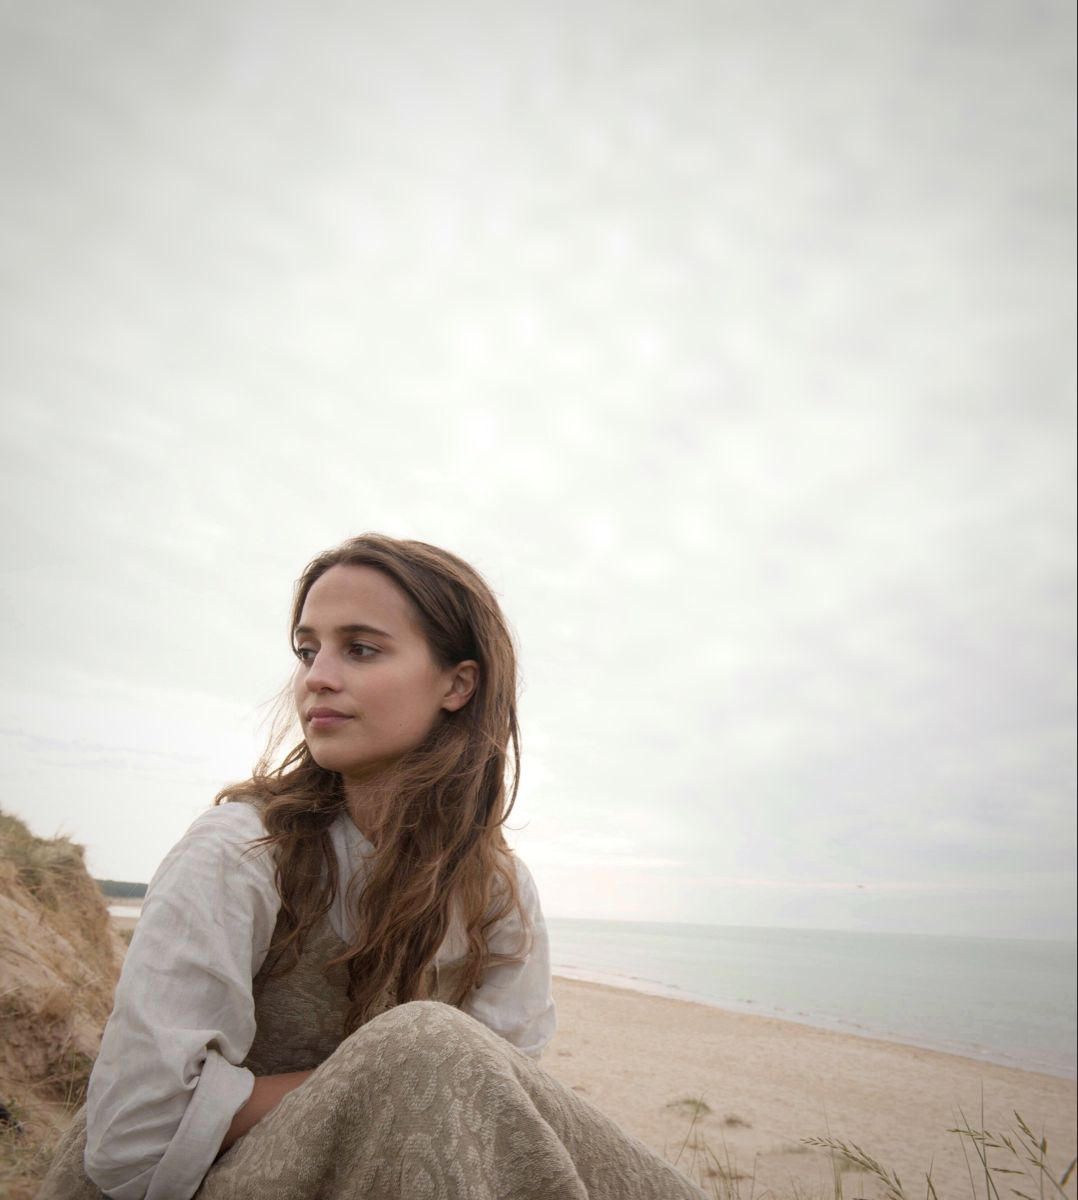 Alicia Vikander For US Marie Claire 2018 Wallpapers